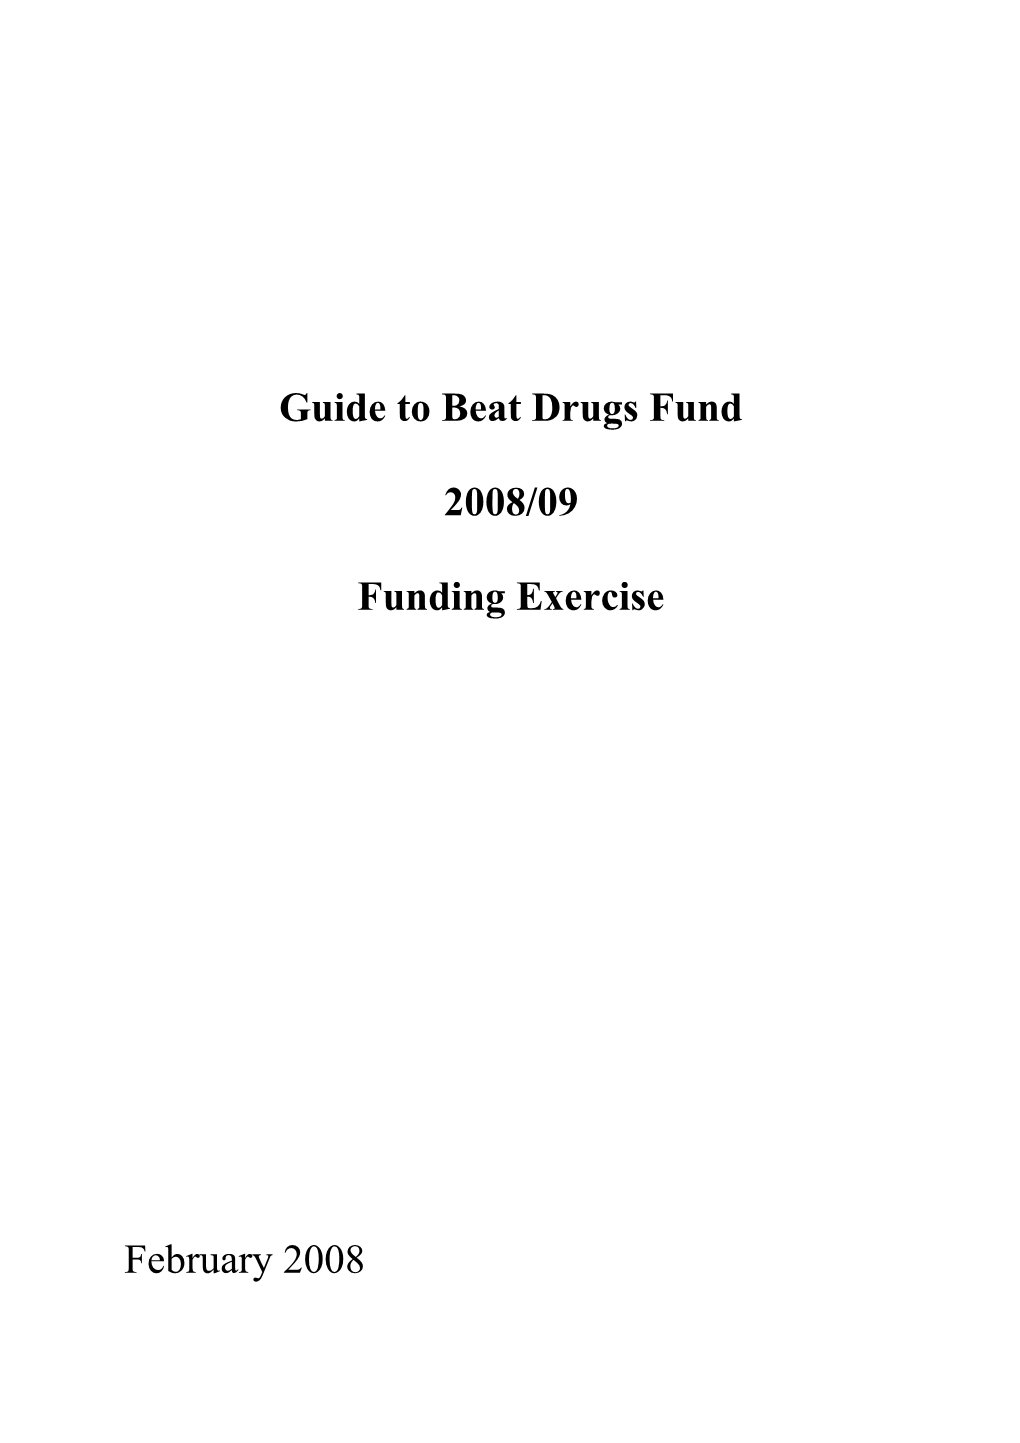 Application for the Beat Drugs Fund